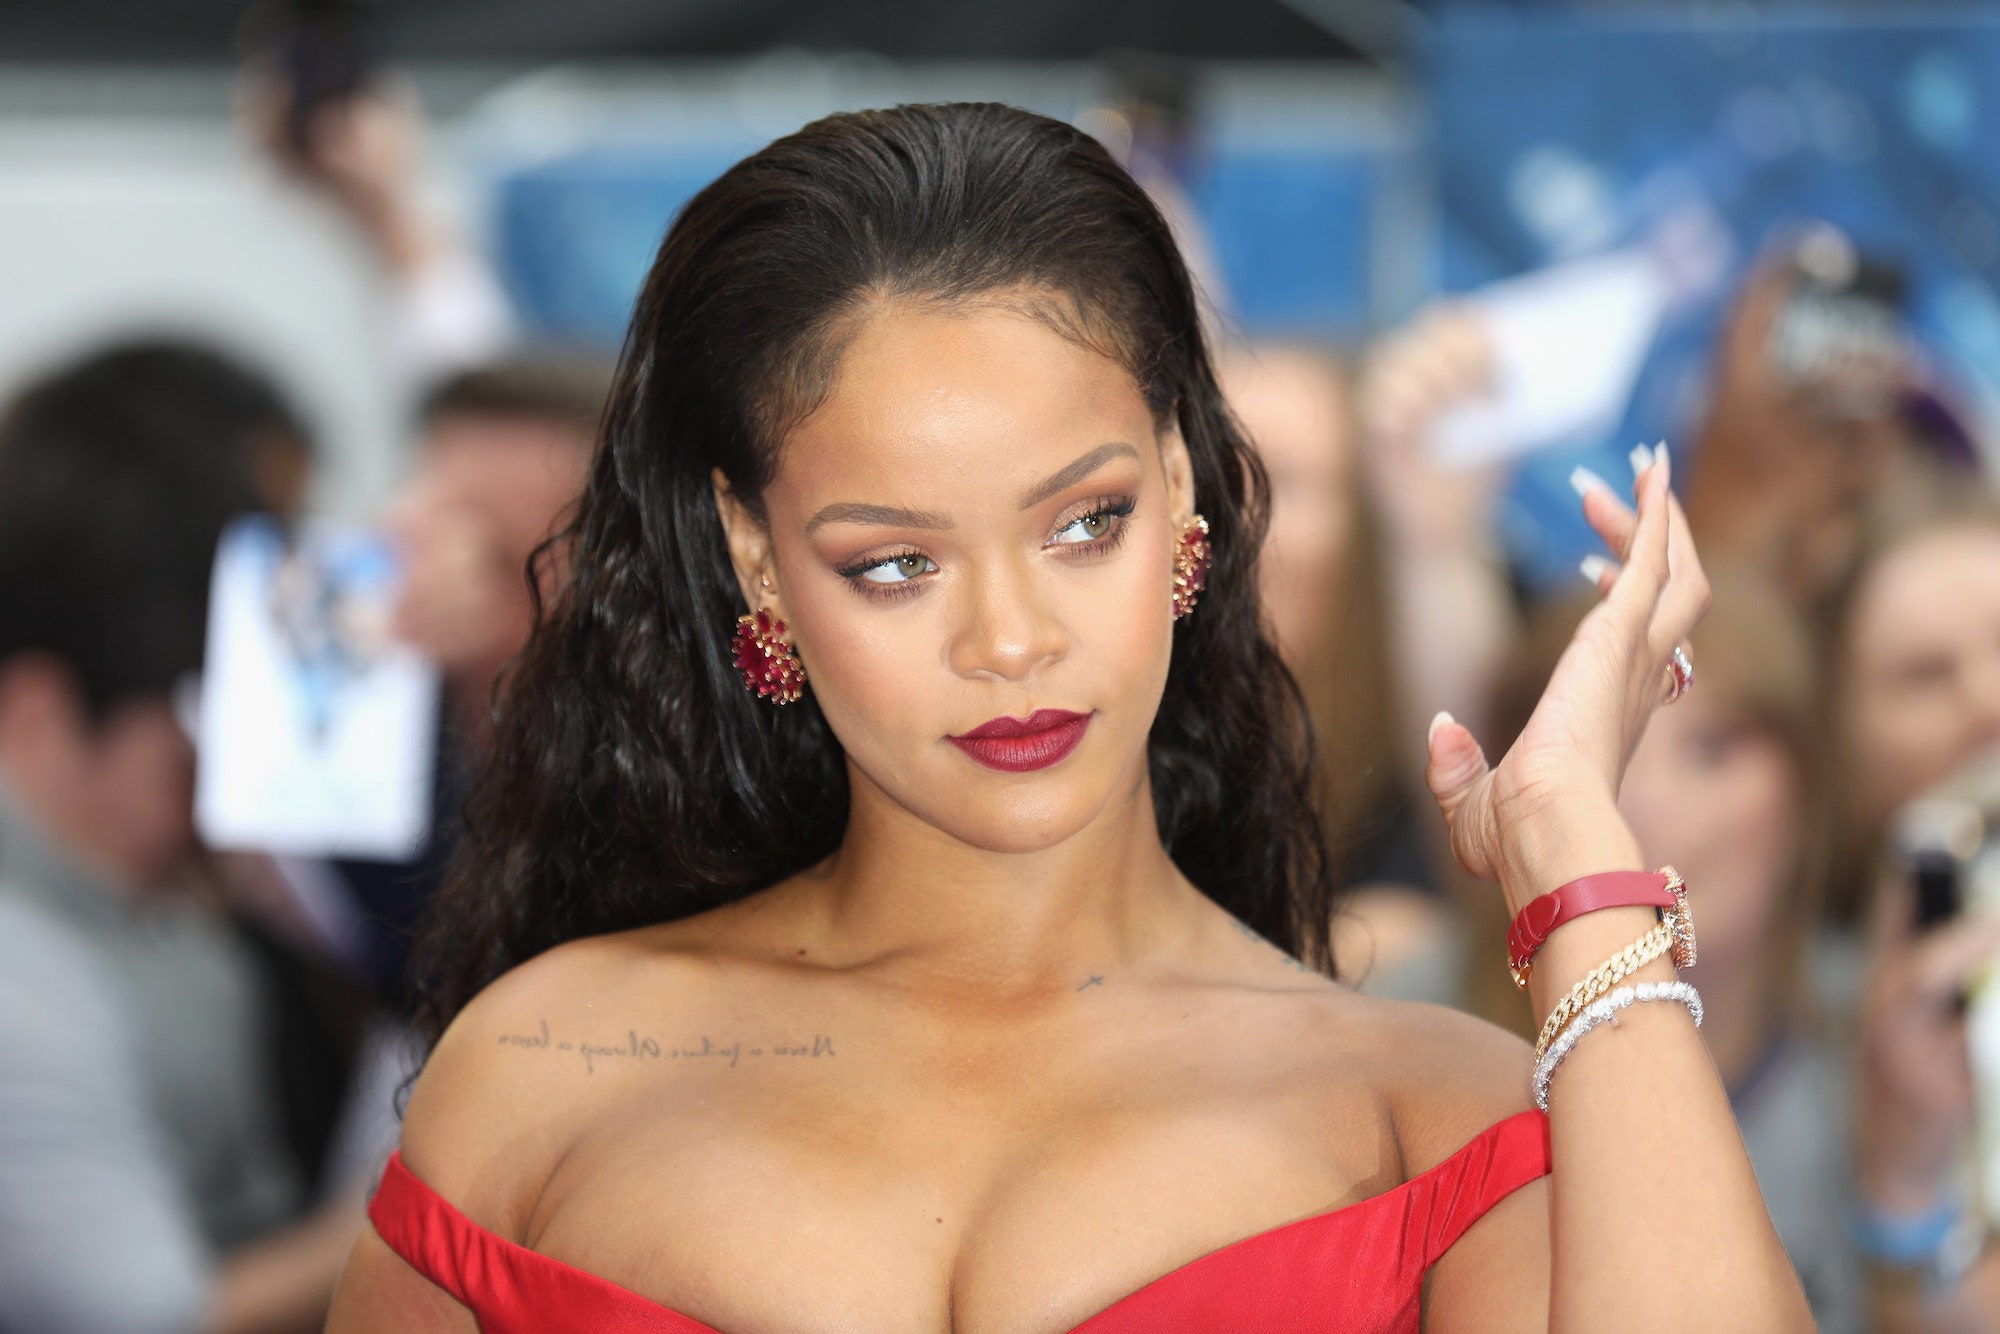 Redefine the nude vibe with Rihanna's daring and stunning style escapades! Indulge in the risqué, audacious and empowering universe of Rihanna nude fashion looks. Time to stan, honey!